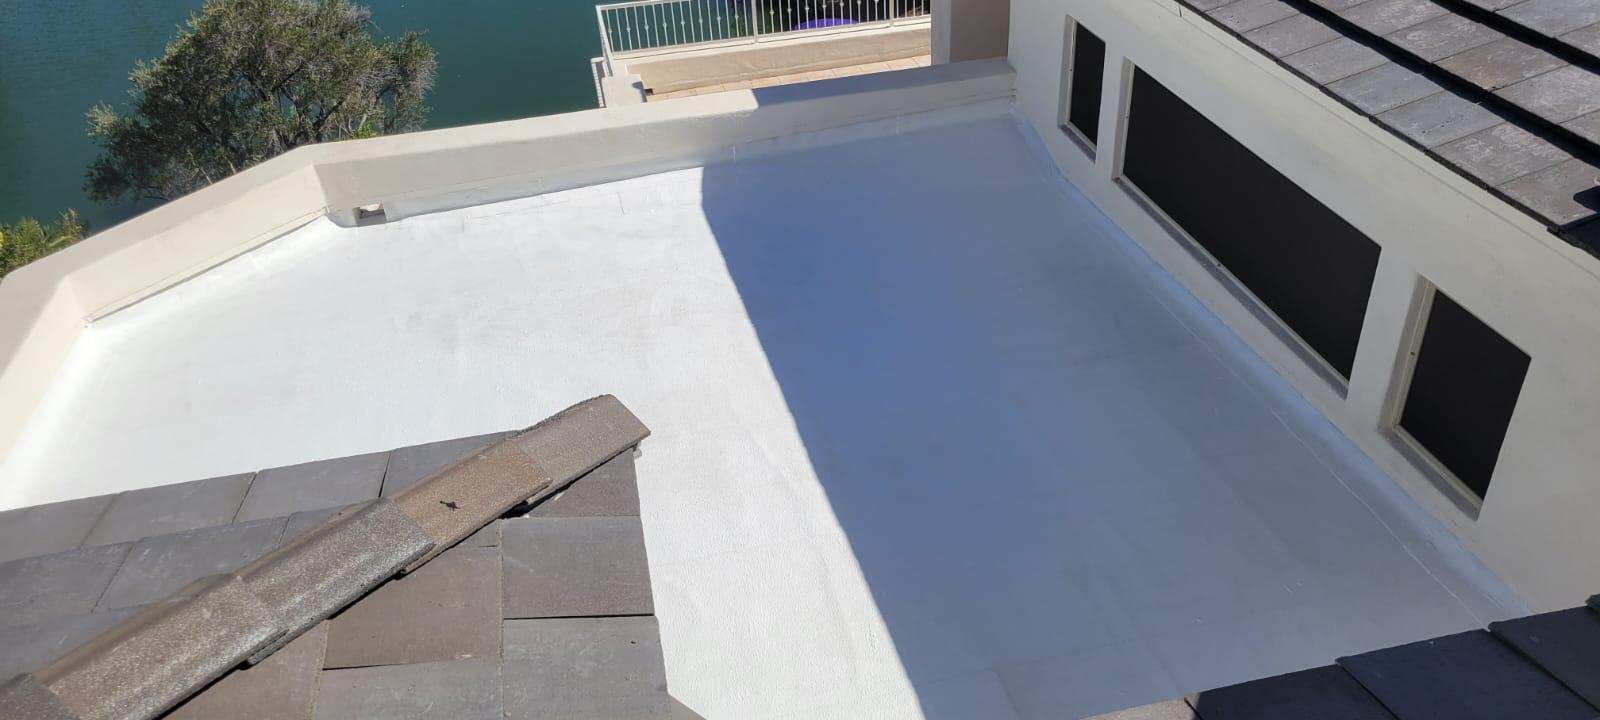 A well-applied spray foam roof with a smooth white finish, ready to withstand Tempe's climate.